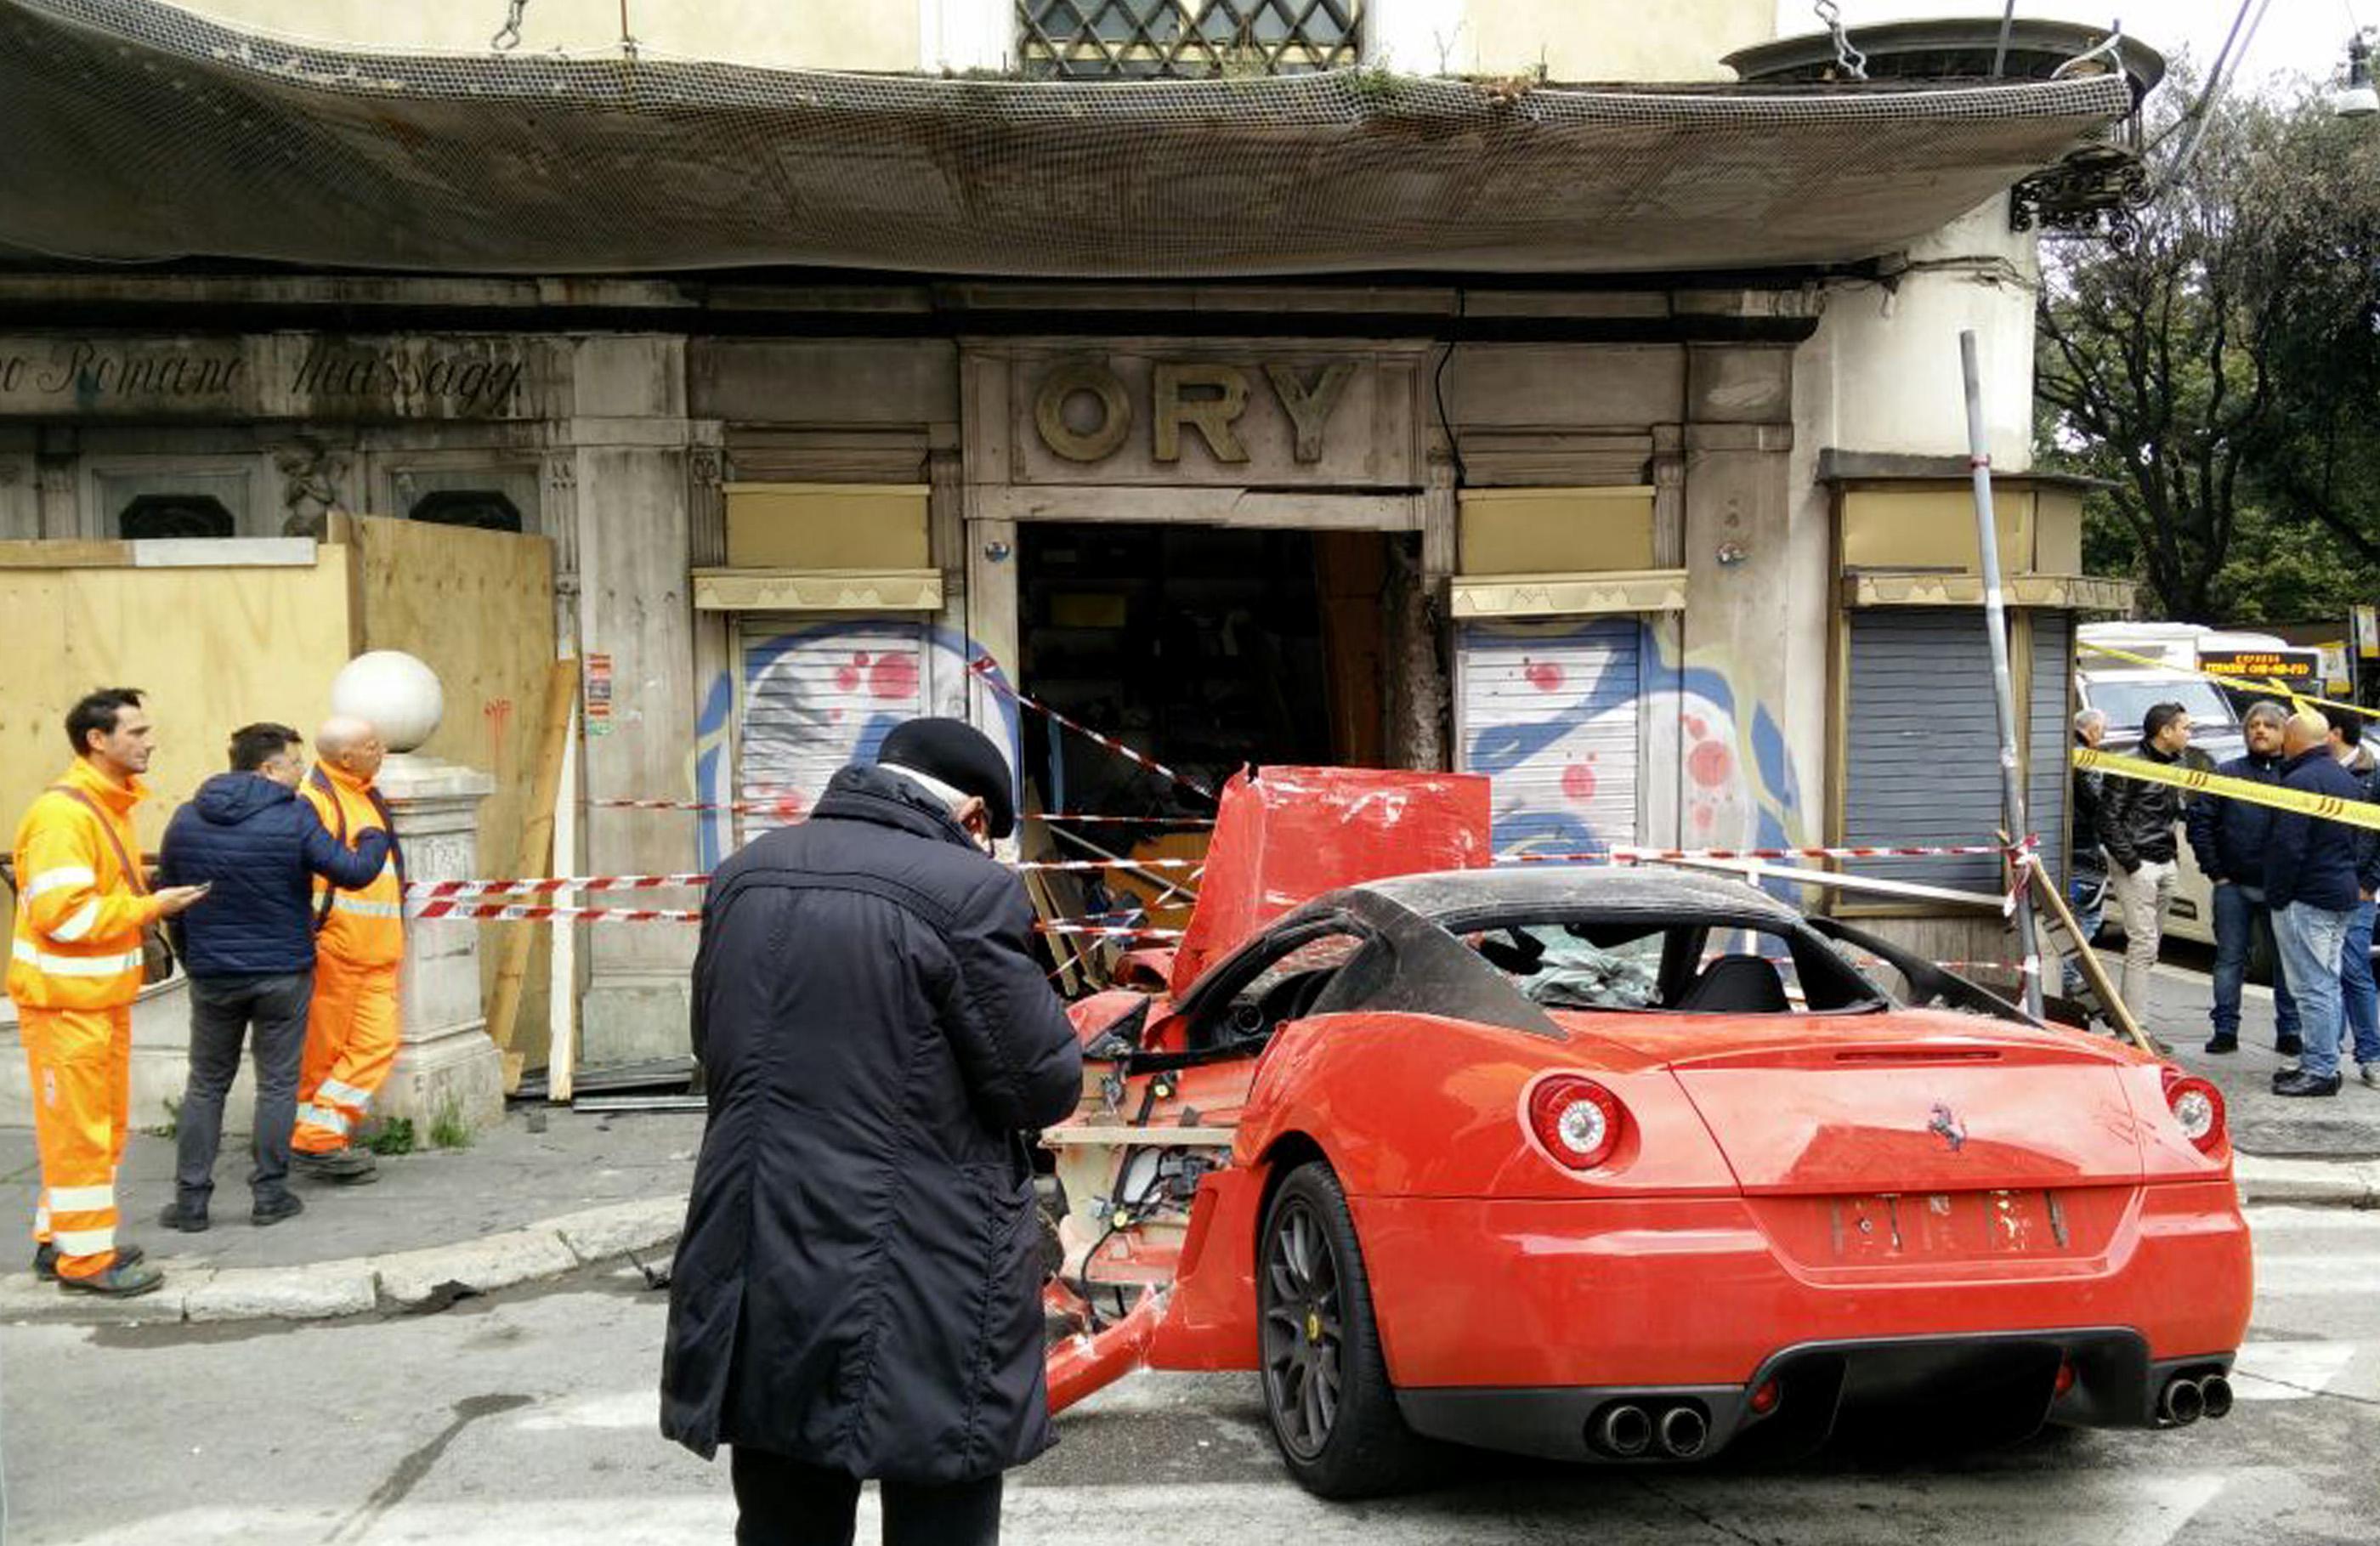 A photograph made available on 01 April 2015 showing the aftermath following a ferrari 599 GTO which crashed into a shop in Viminale's road in Rome, Italy 30 March 2015. (CLAUDIO PERI—EPA)